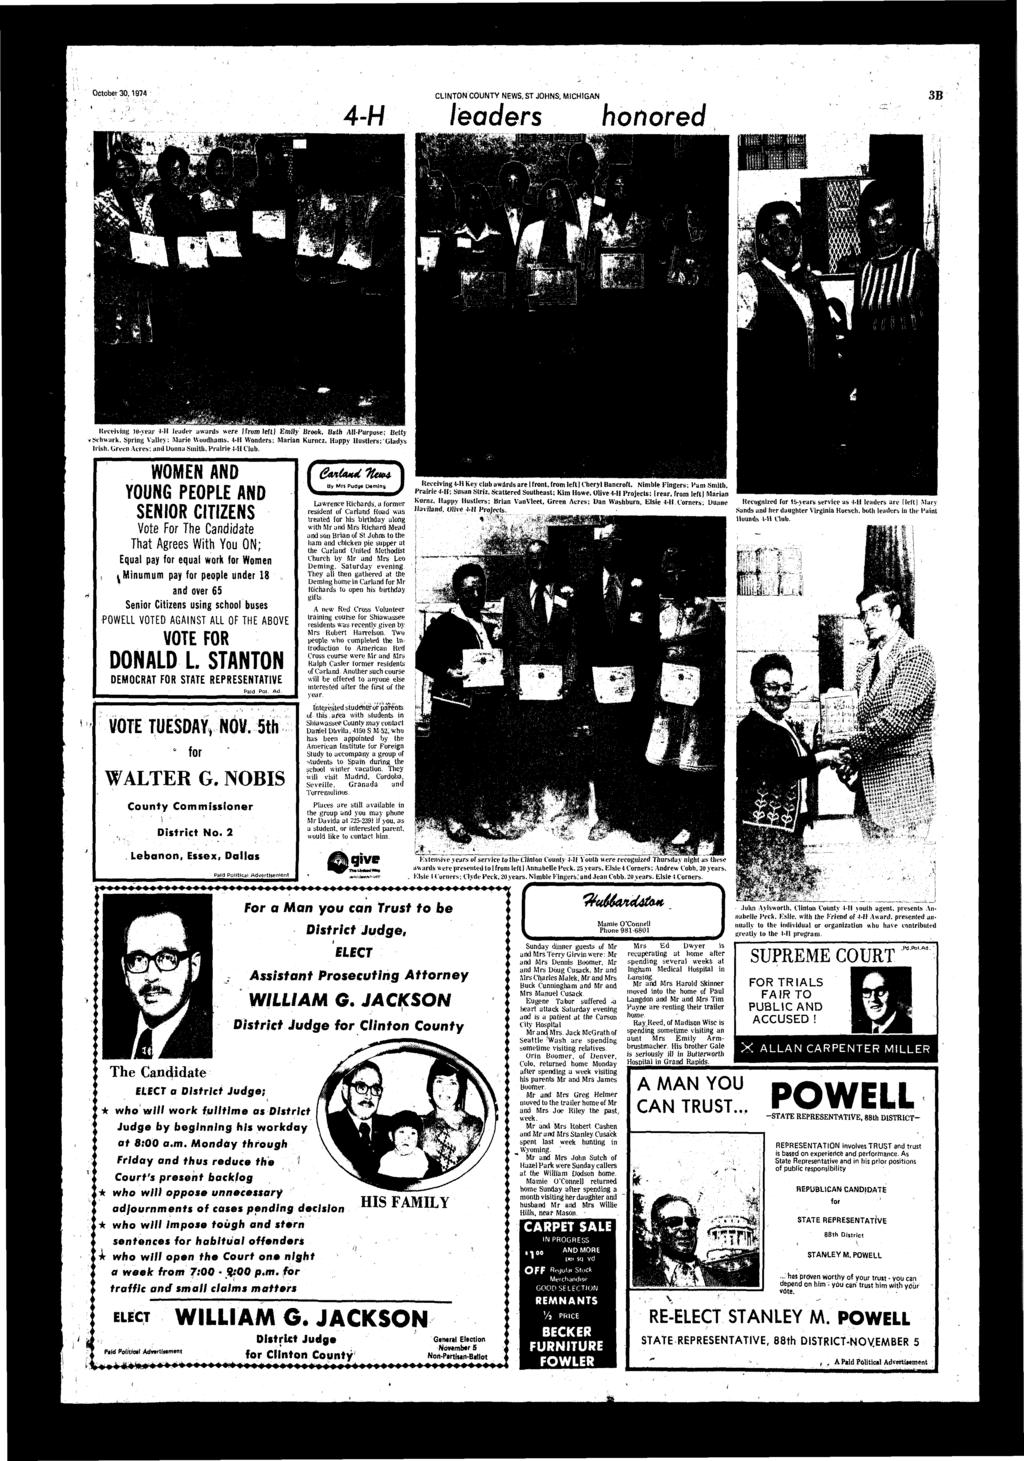 October 30.1974 CLINTON COUNTY NEWS. ST JOHNS; MICHIGAN leders honored 3B KeeeHmg )y-yer -Ml leder wrds were [from left) Emily Brook. Bth AH-Purpose; Betty yst-hwrk. Spring Vlley; Mrie Woudhms.